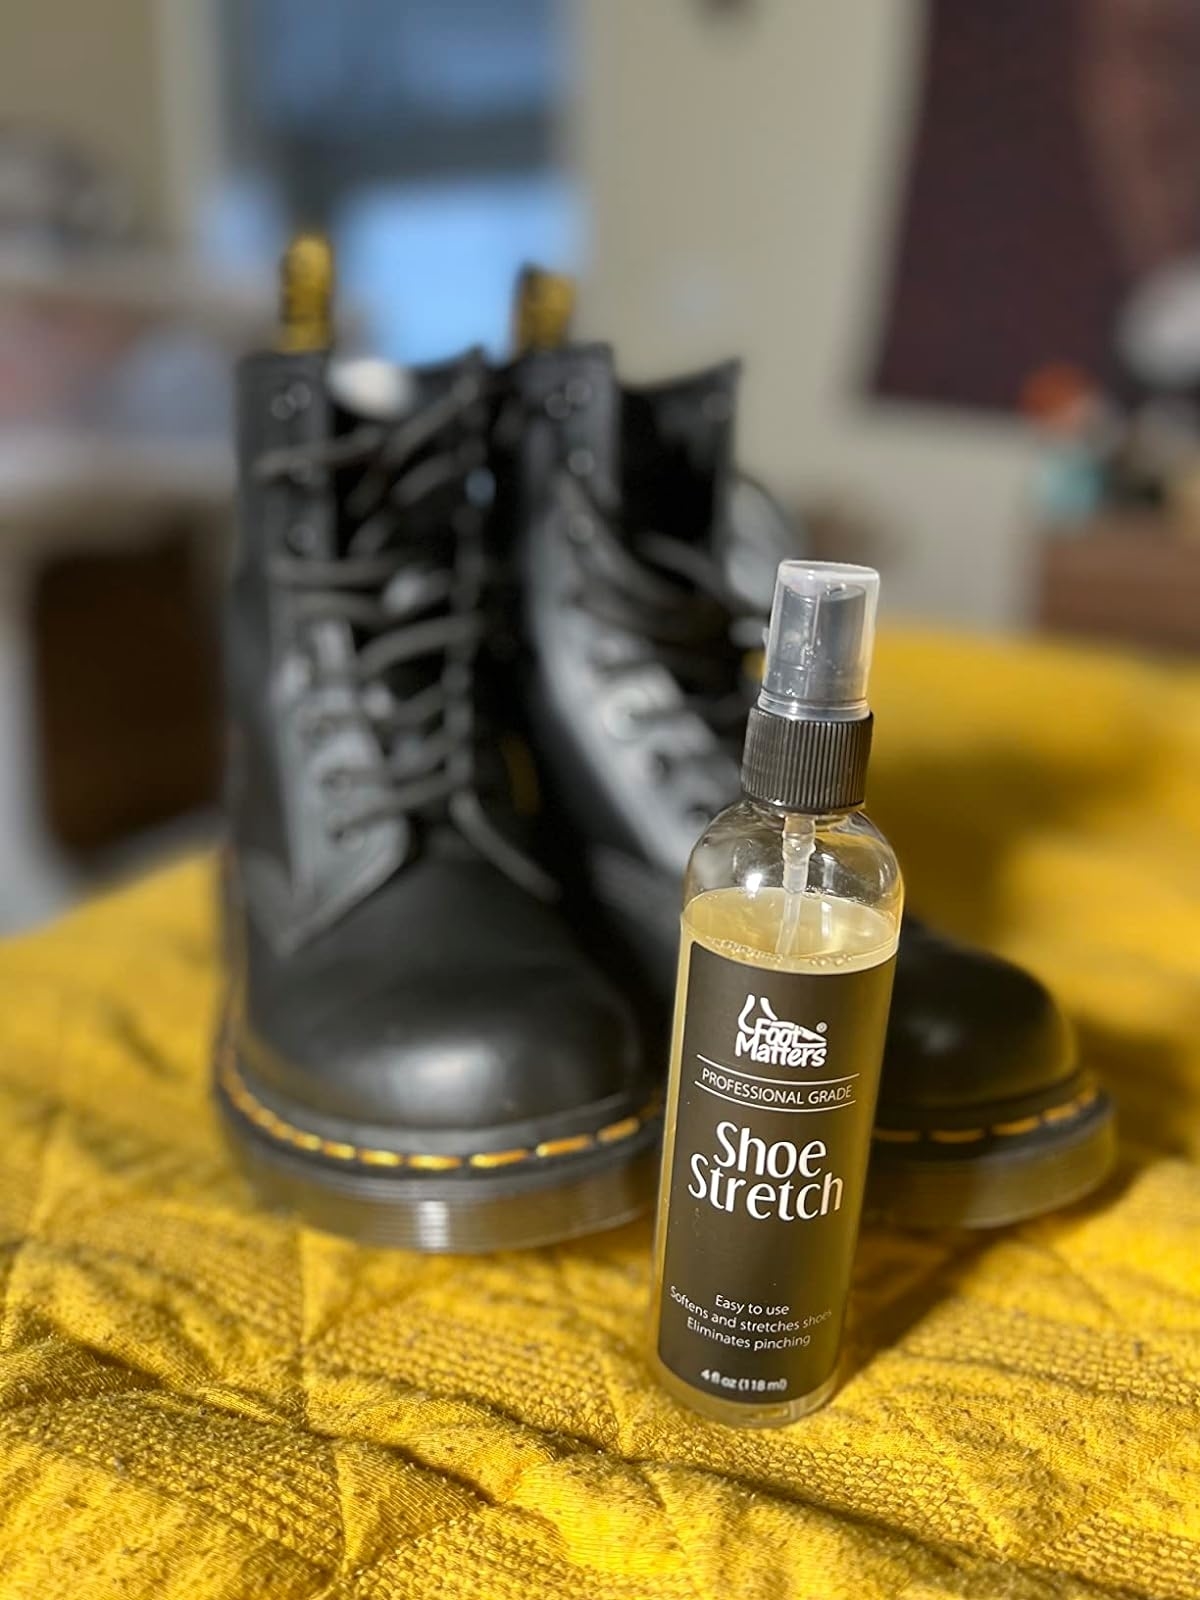 Reviewer image of the bottle of shoe stretch spray next to a pair of shoes